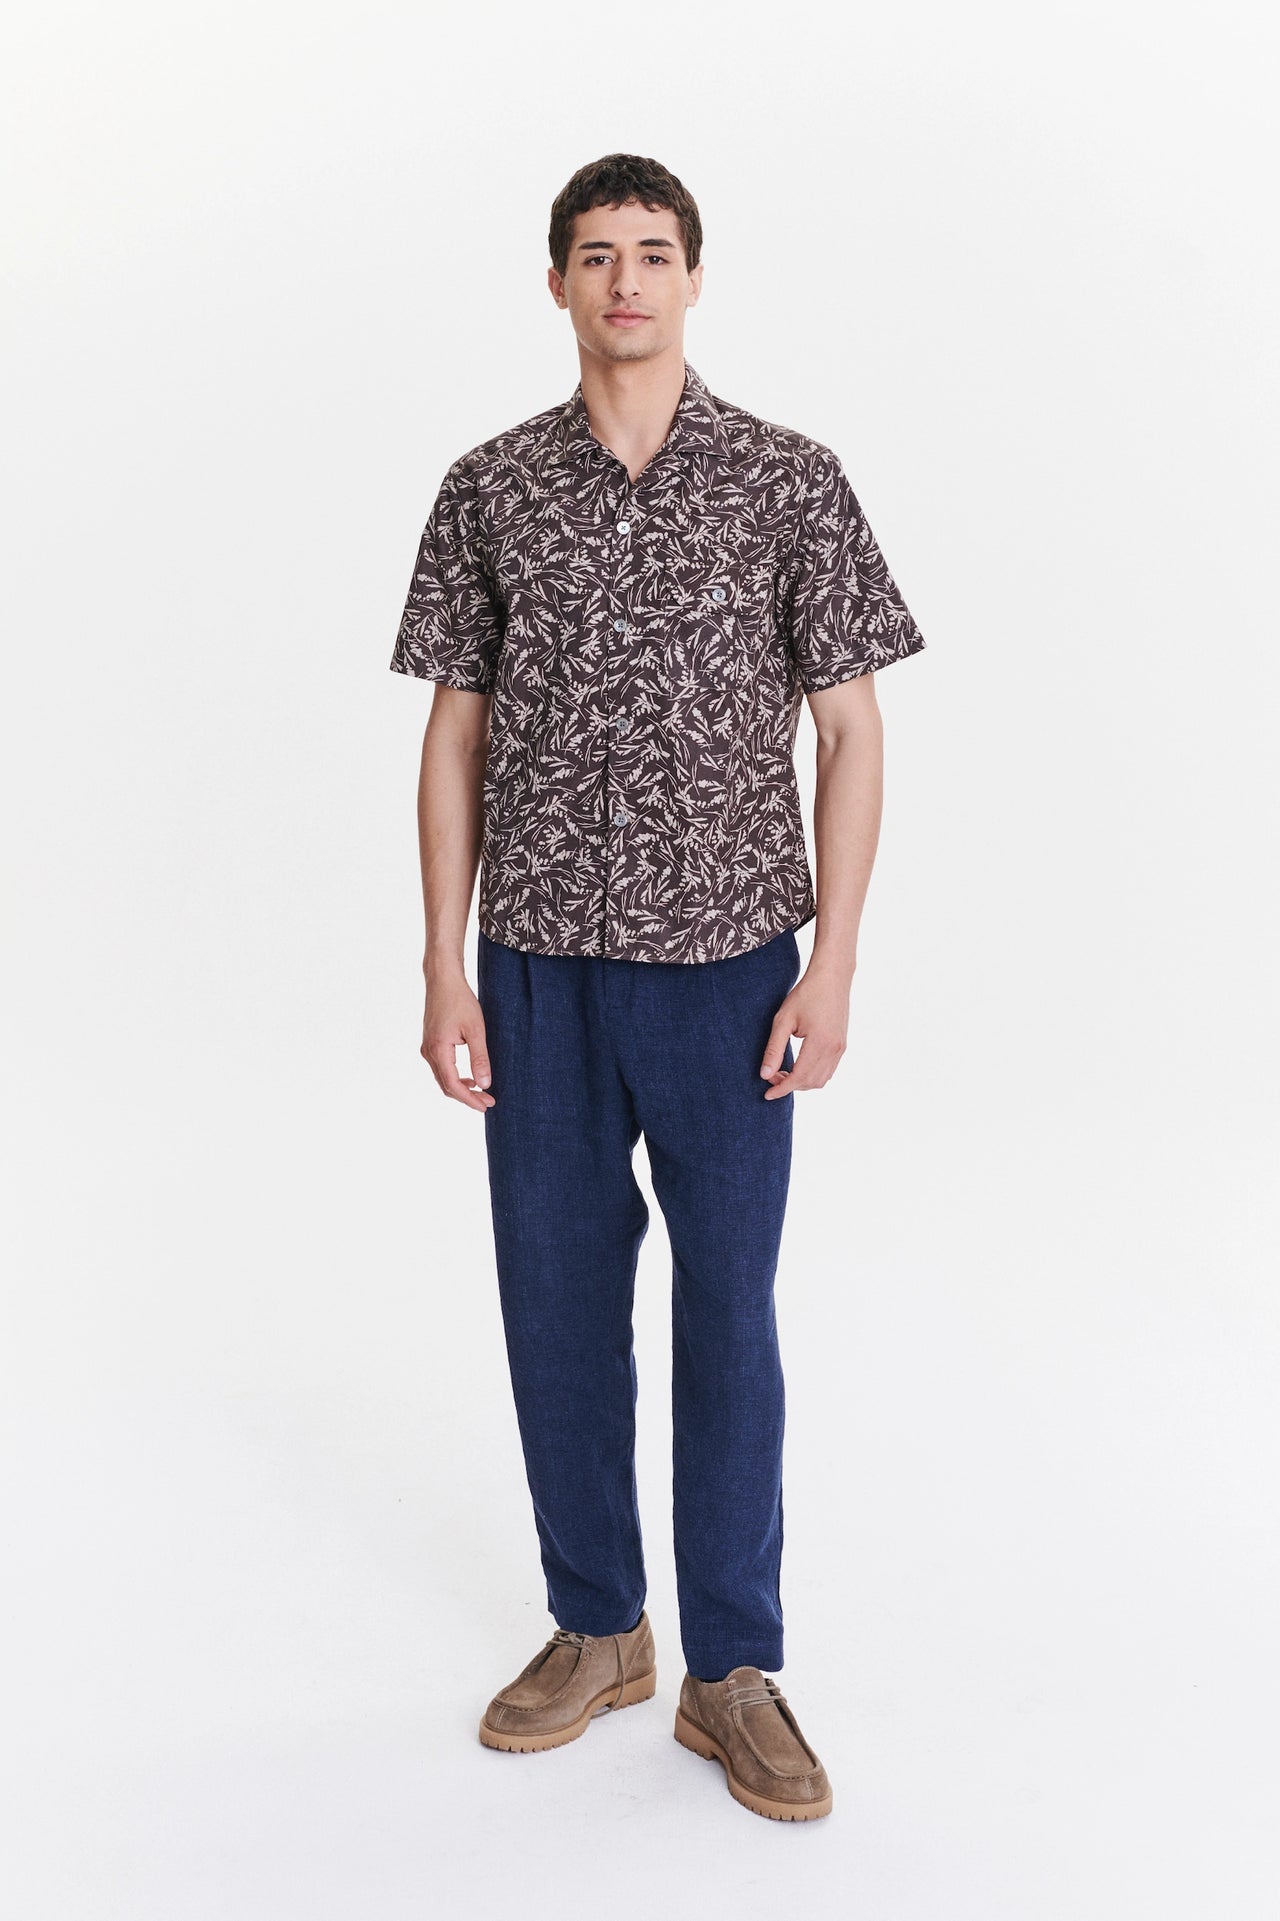 Short Sleeve Camp Collar Shirt in a Brown and Off White Floral Printed Italian Cotton